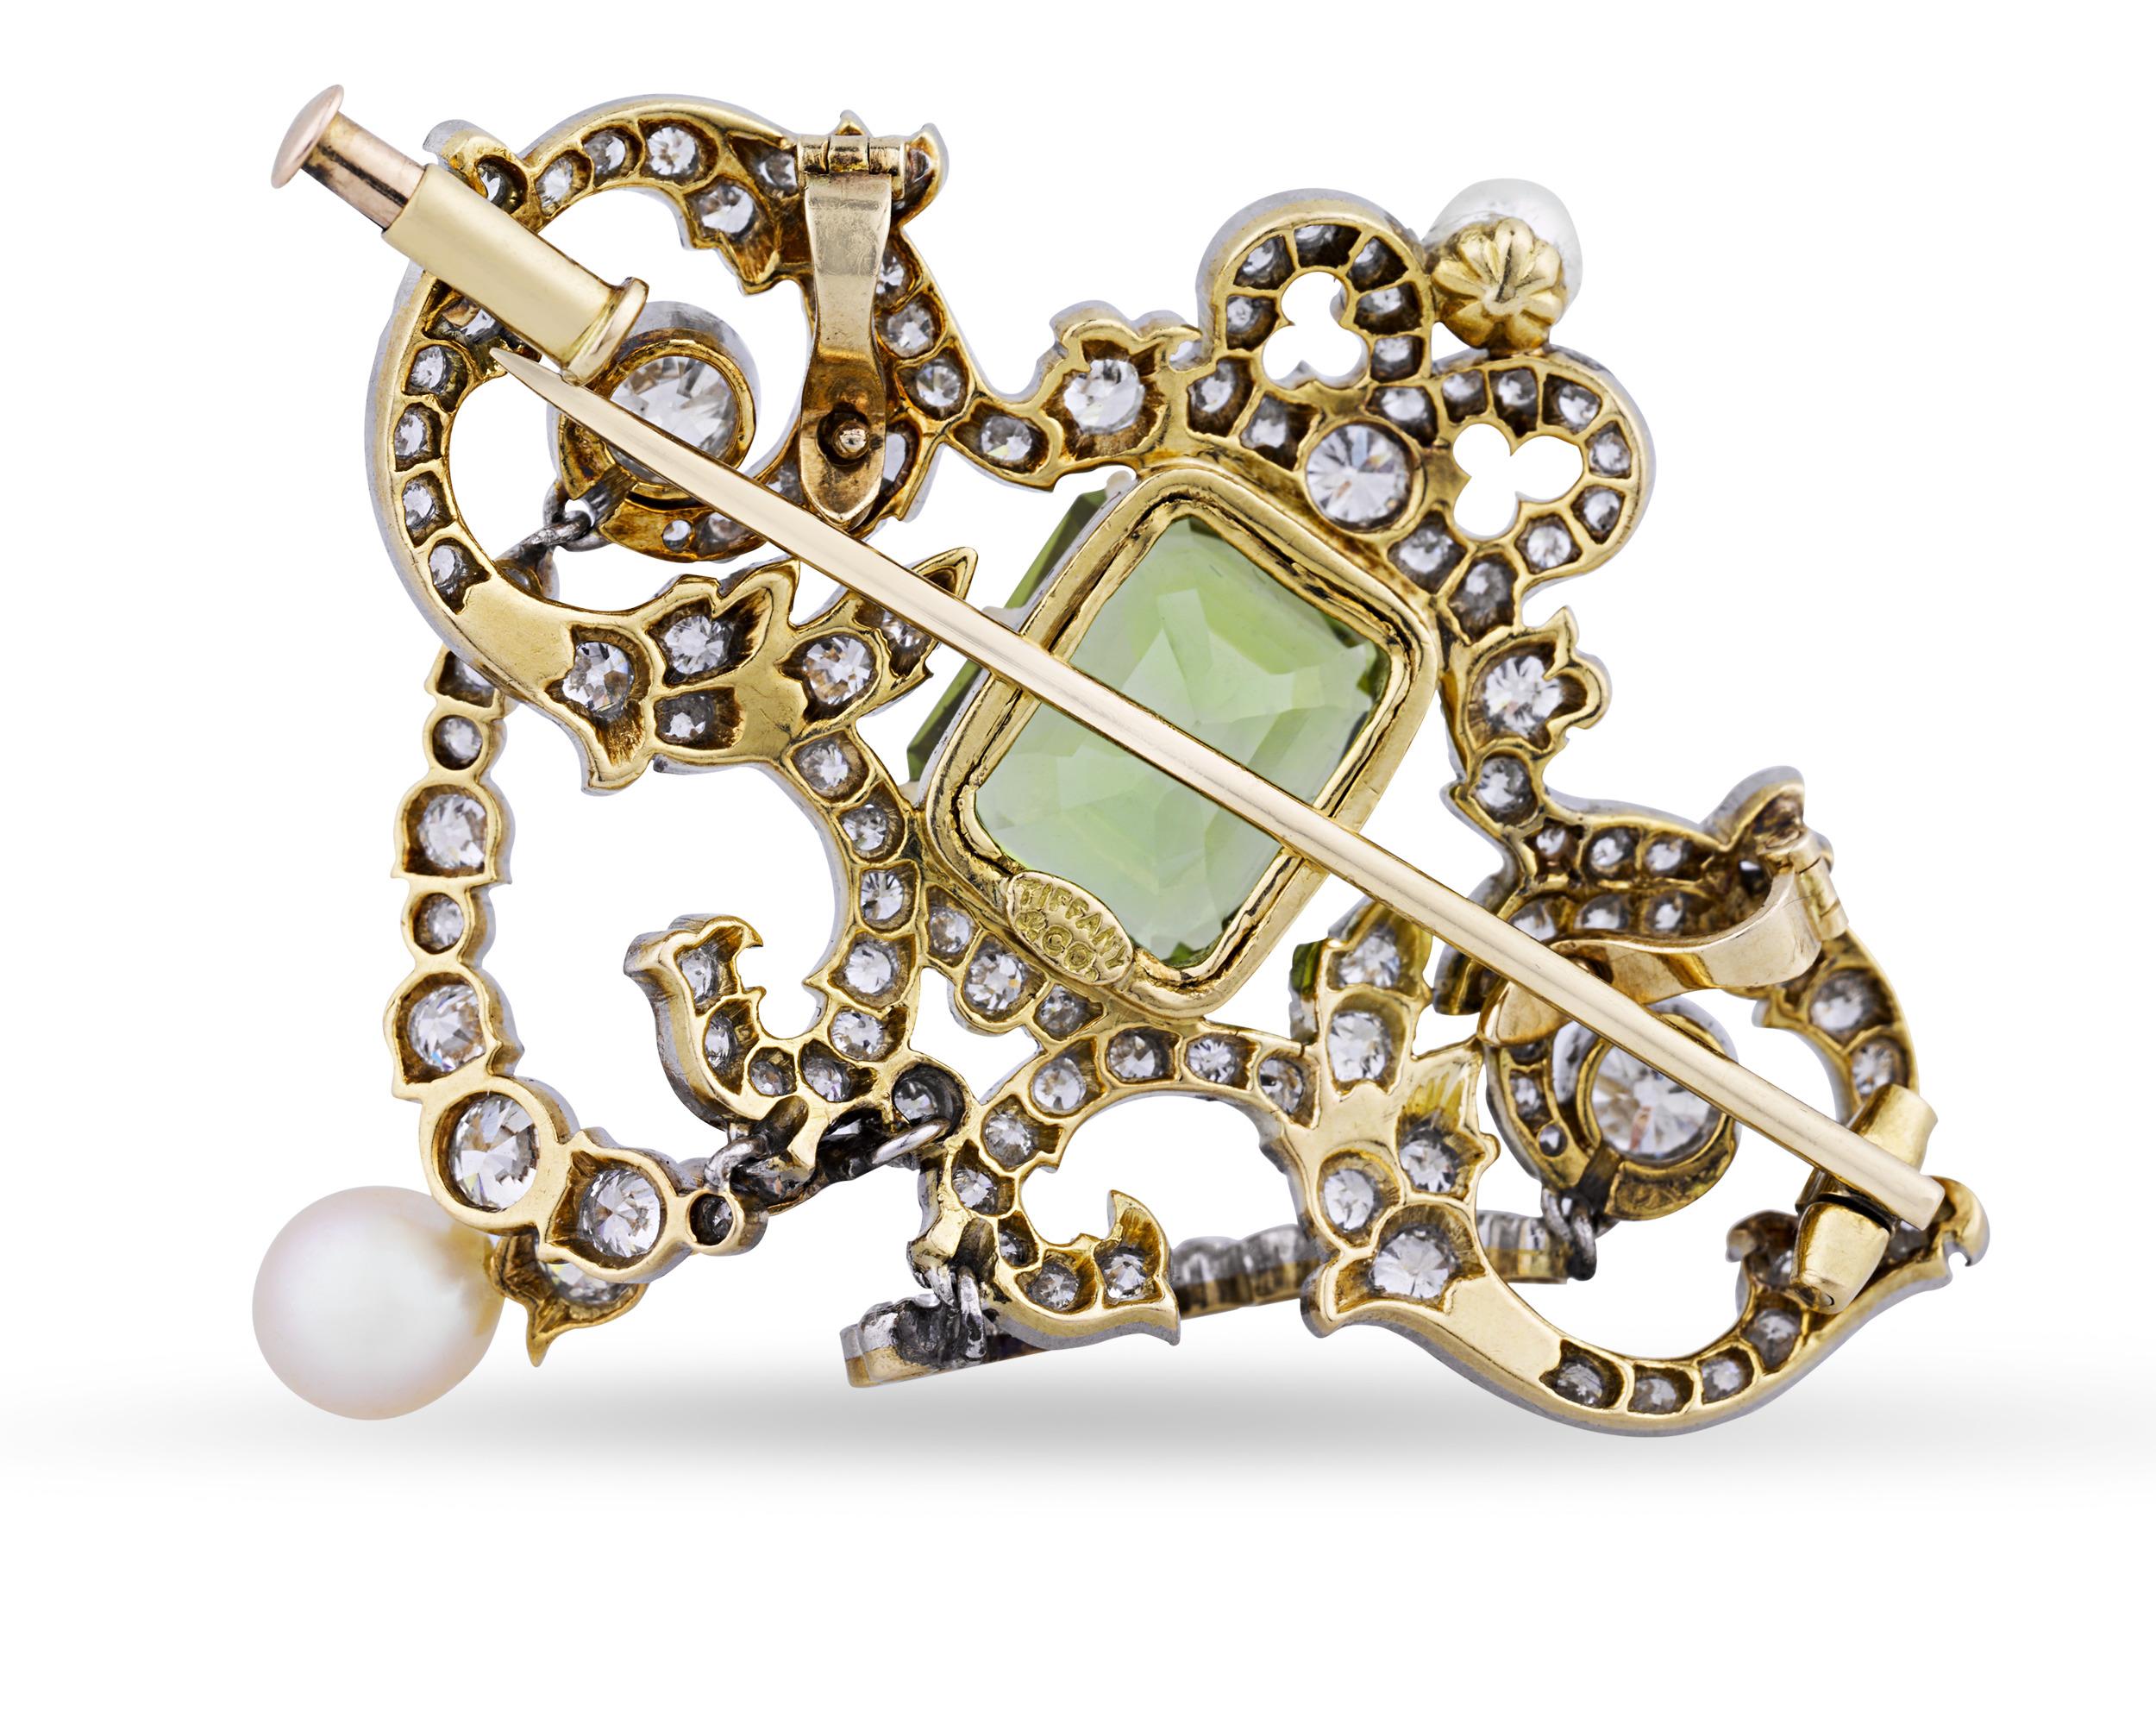 This early 20th-century pendant by Tiffany & Co. features a mesmerizing emerald-cut peridot weighing 5.50 carats embellished with 120 Old European-cut diamonds totaling 3.75 carats. The elegant pendant also features two lustrous pearls set in 18K